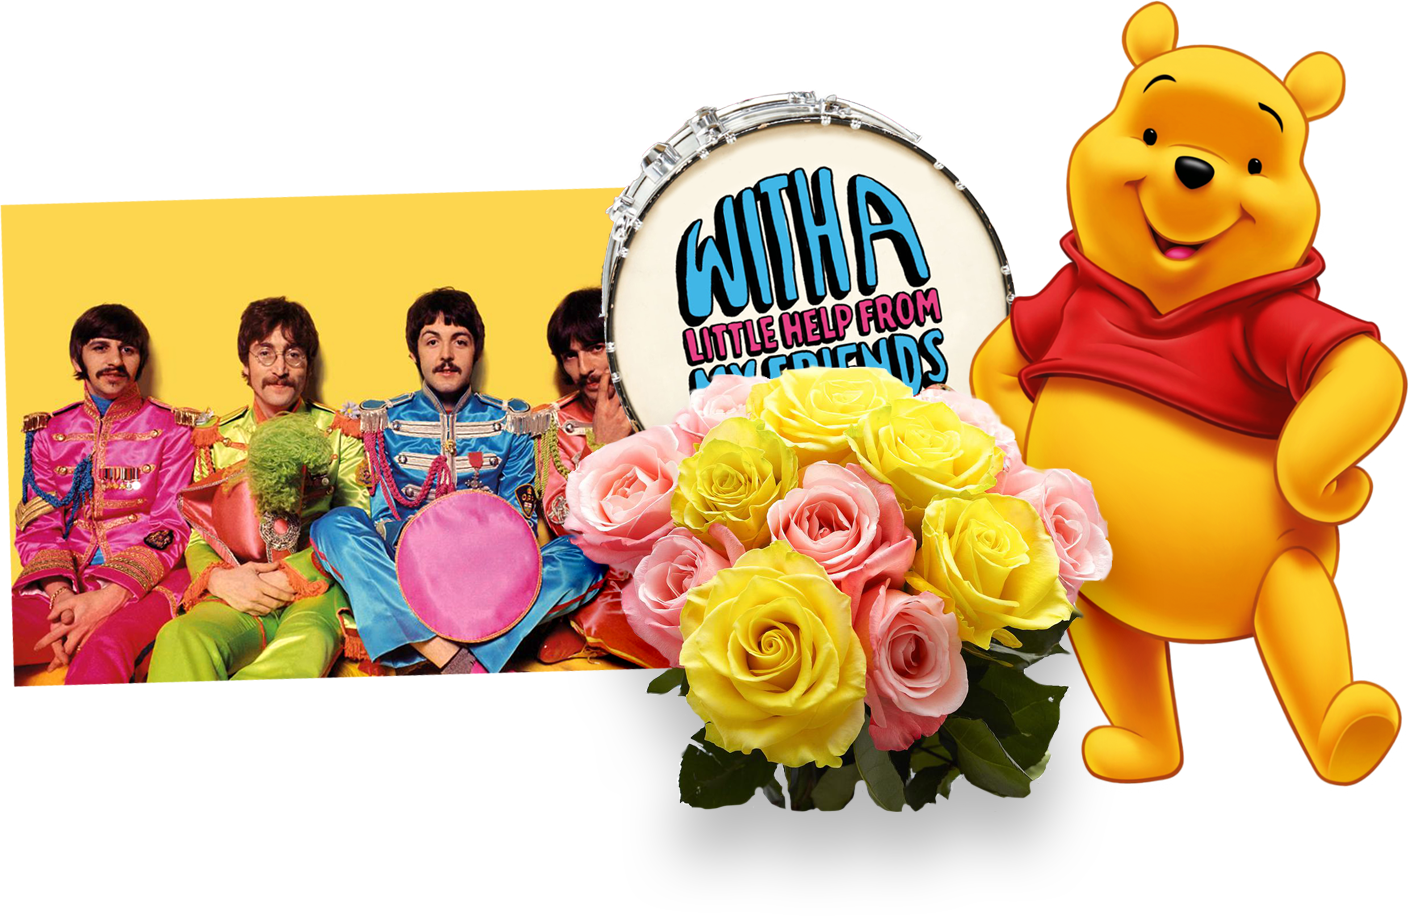 Beatles and Winnie the Pooh